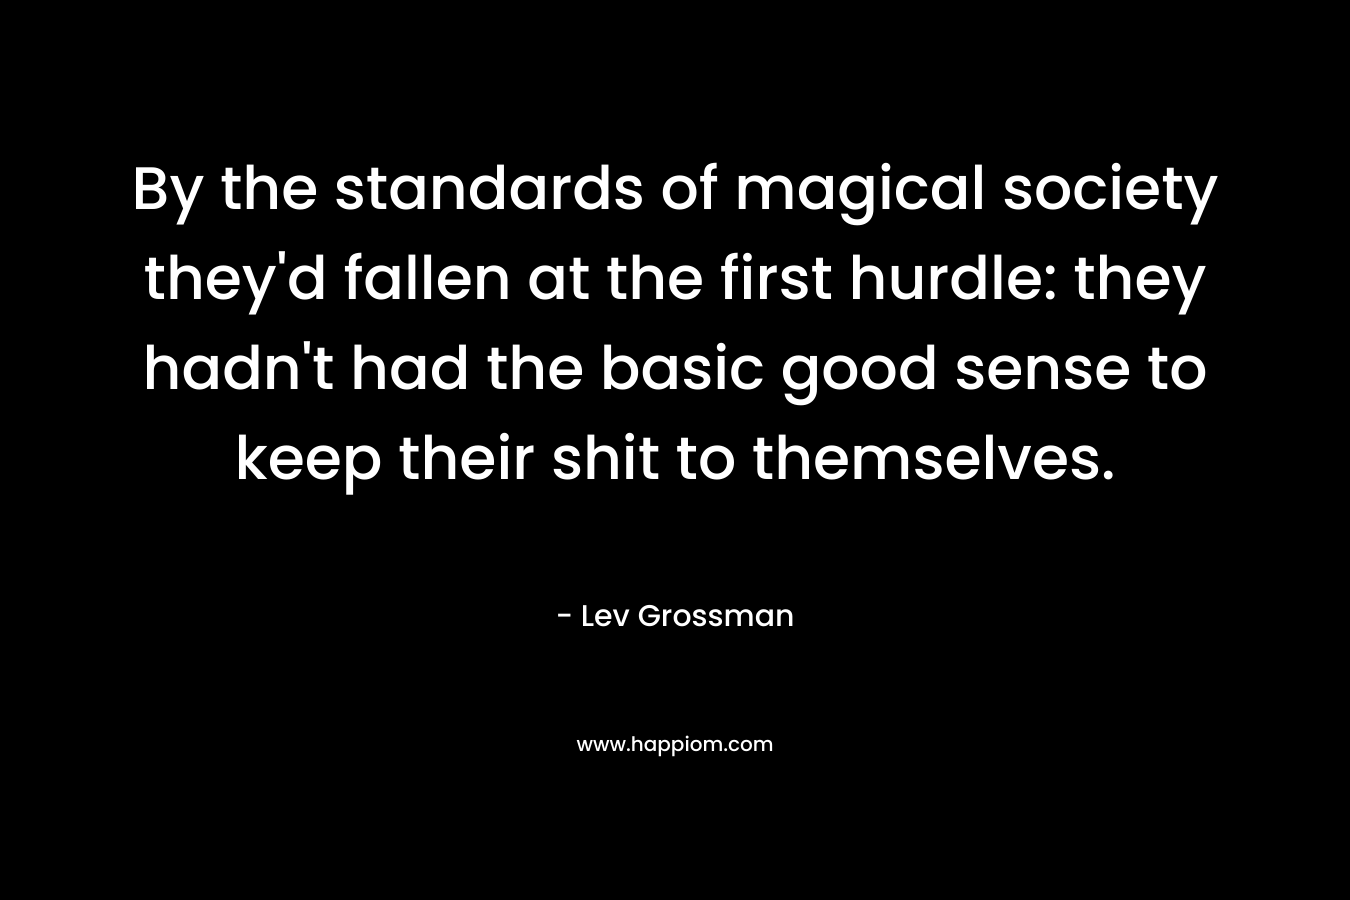 By the standards of magical society they’d fallen at the first hurdle: they hadn’t had the basic good sense to keep their shit to themselves. – Lev Grossman